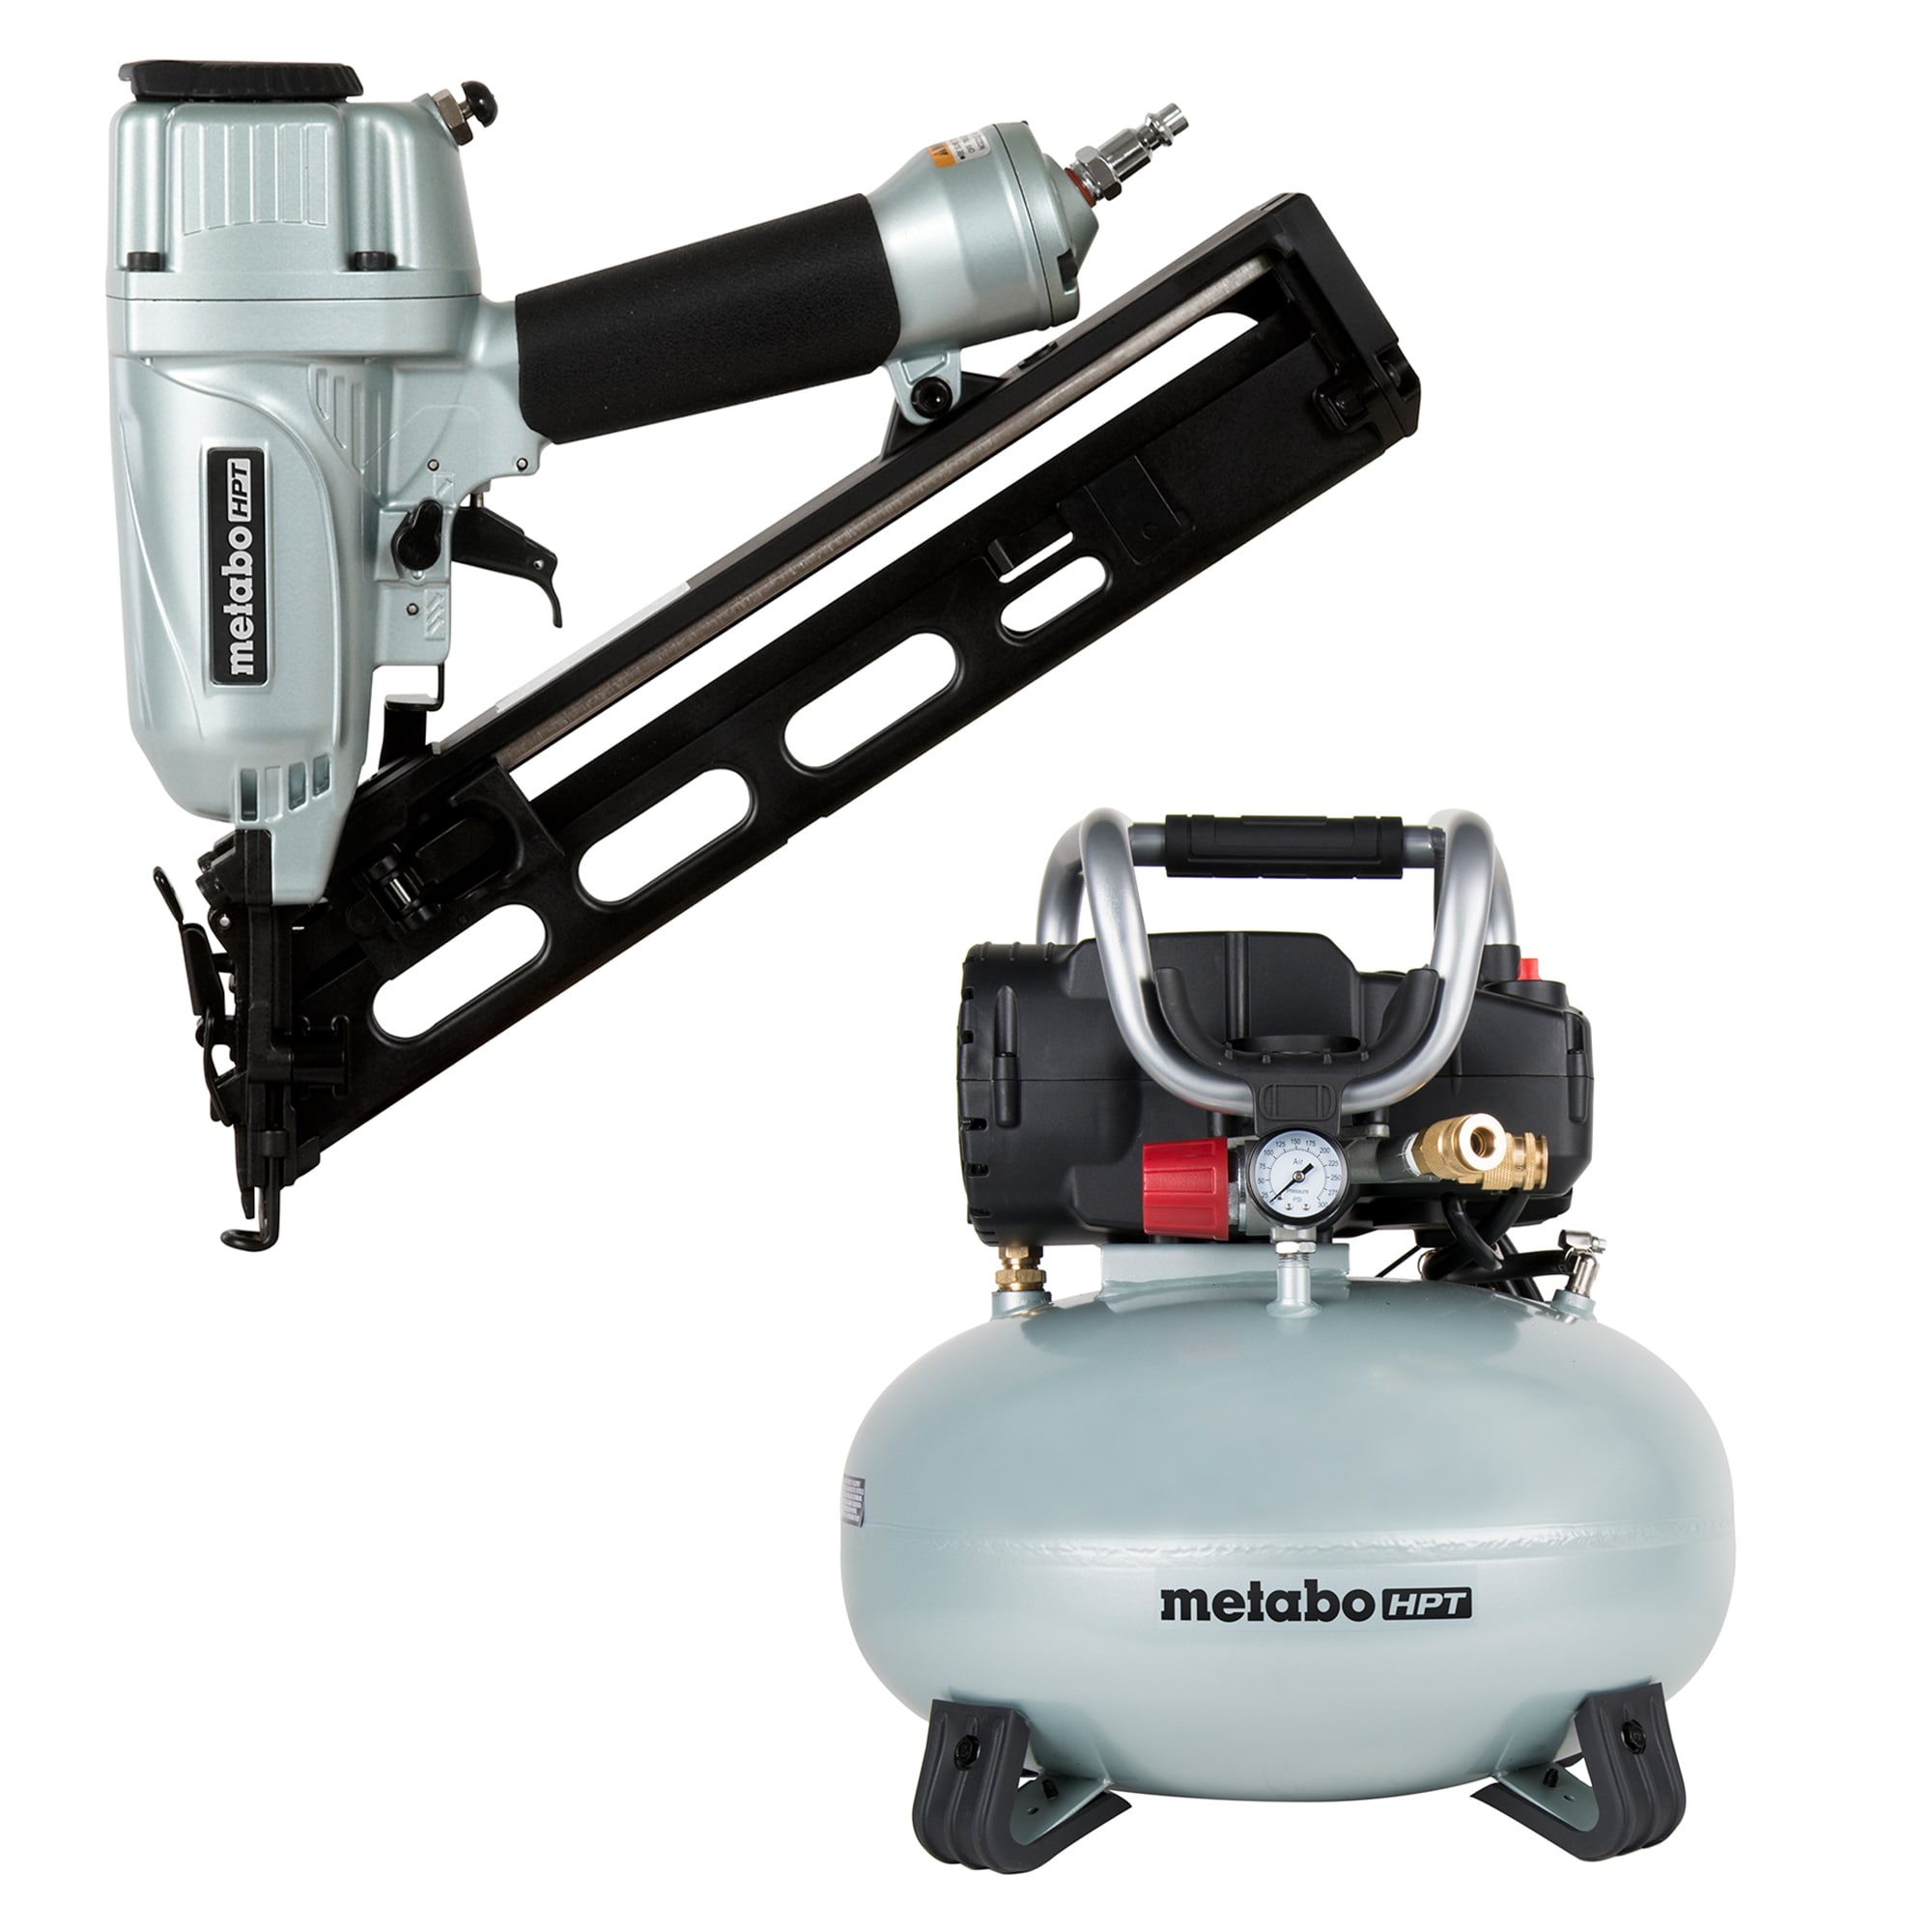 Metabo HPT 15-Gauge Pneumatic Finish Nailer with 6-Gallon Single Stage Portable Corded Electric Pancake Air Compressor